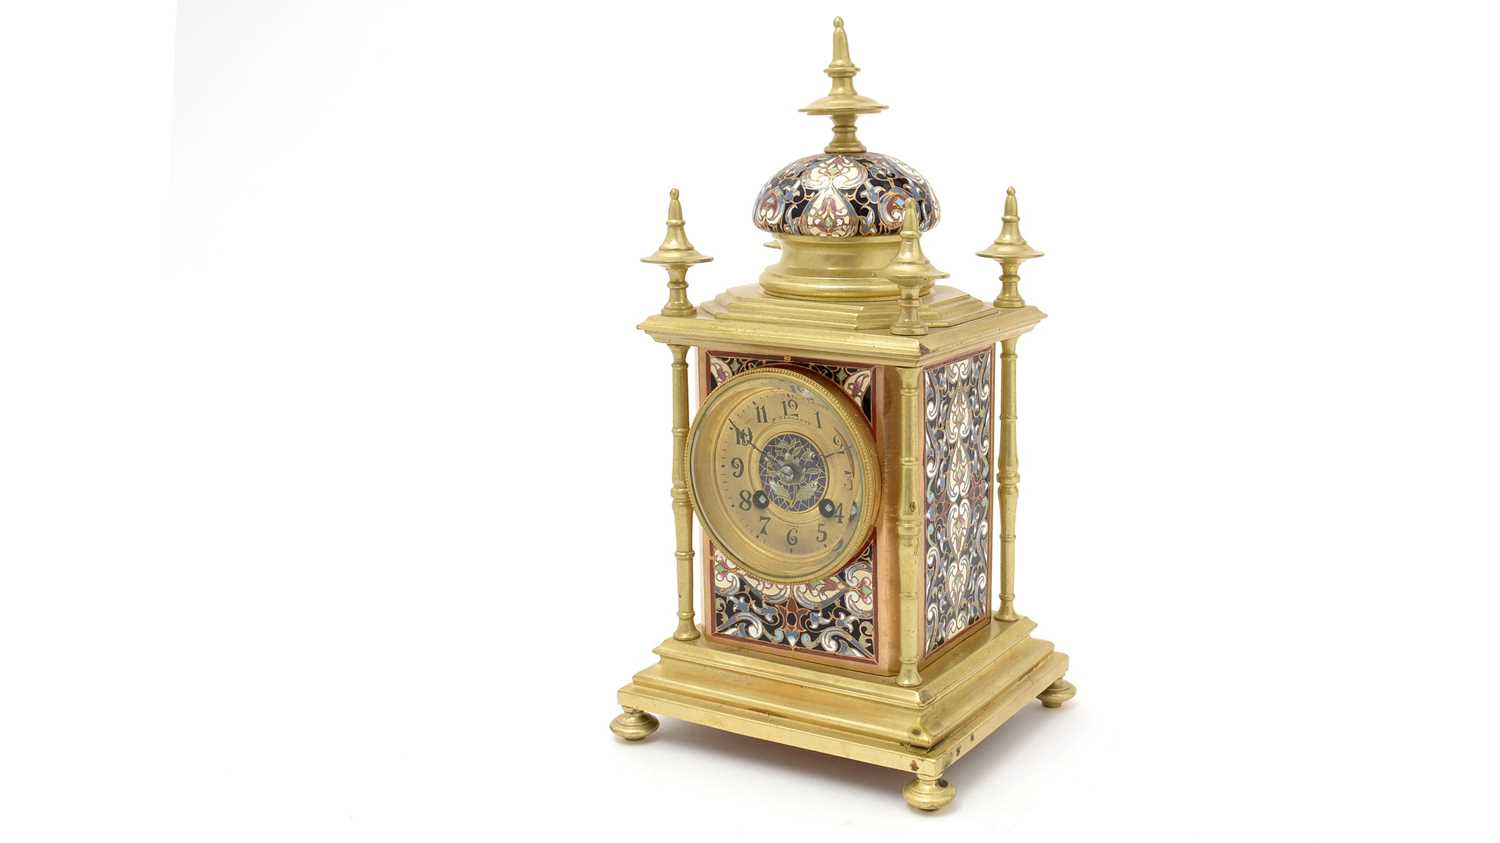 Vincenti et Cie: a French 19th Century gilt brass and champleve mantel clock.